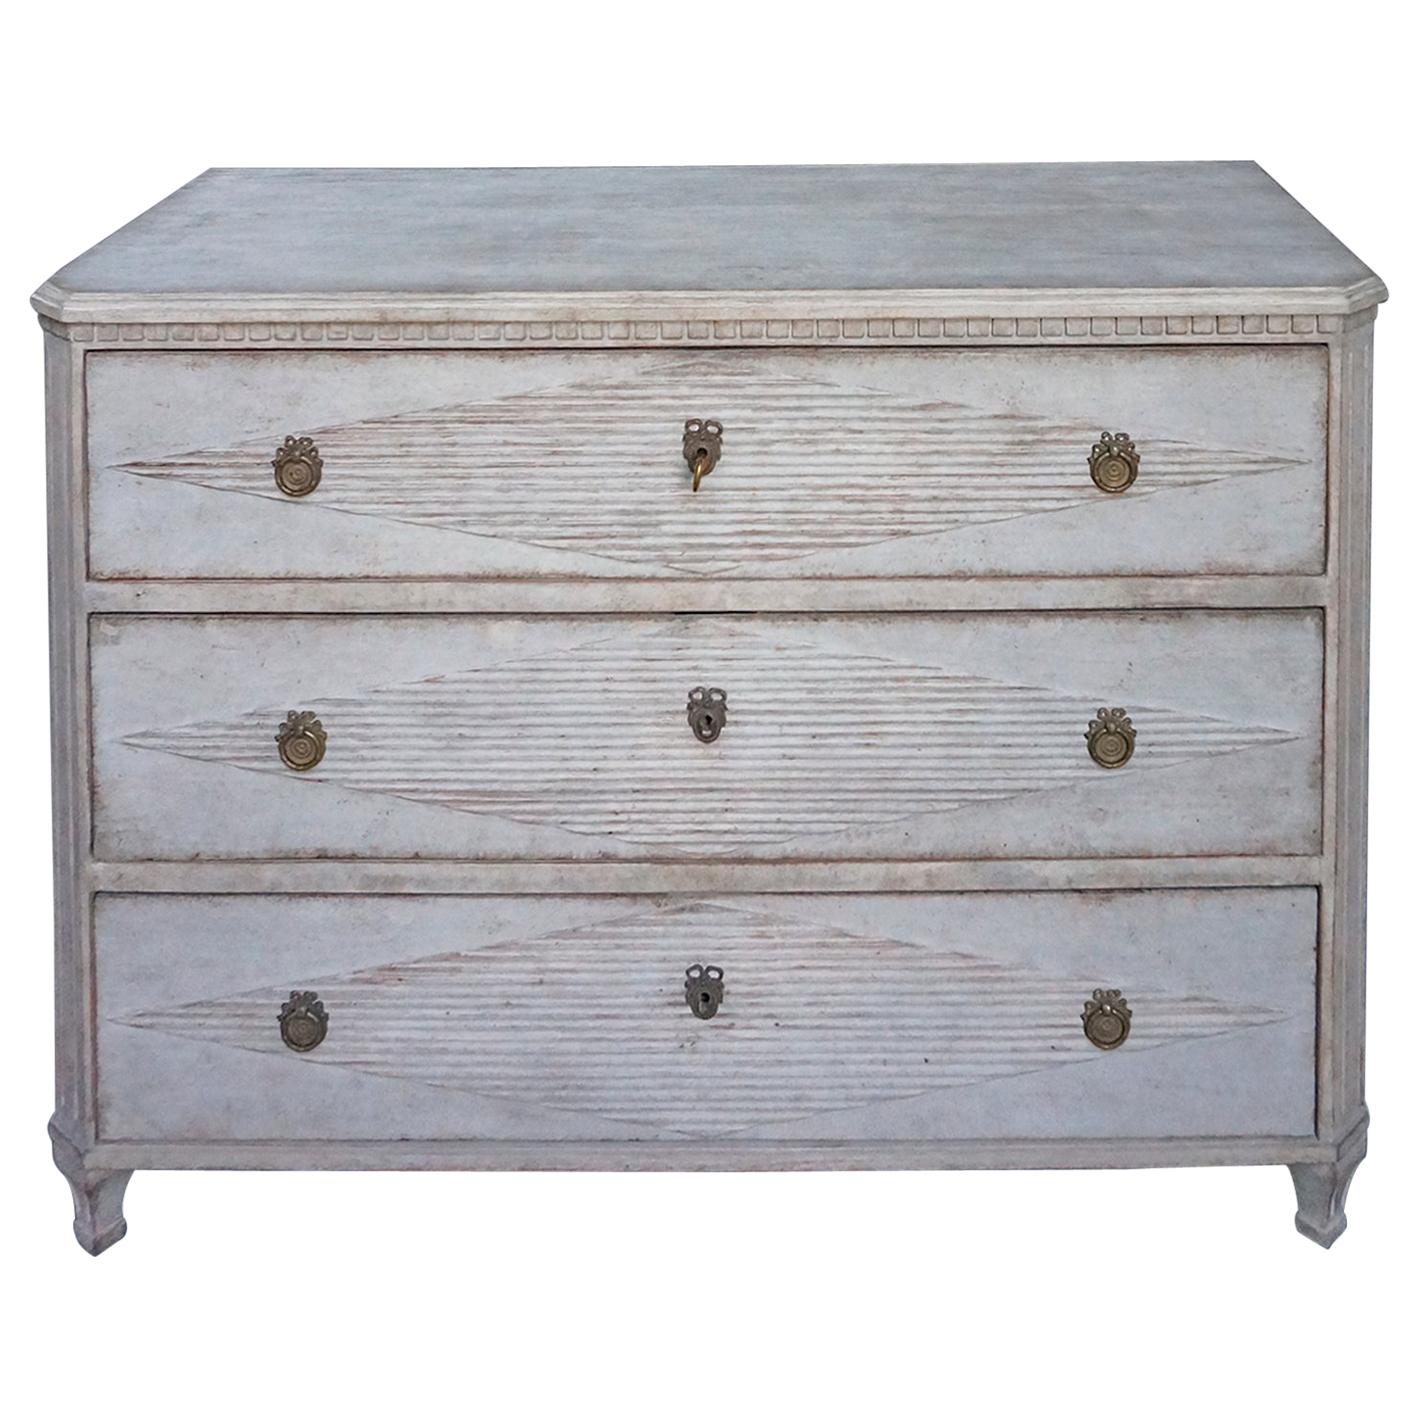 Swedish Chest of Drawers with Reeded Lozenges